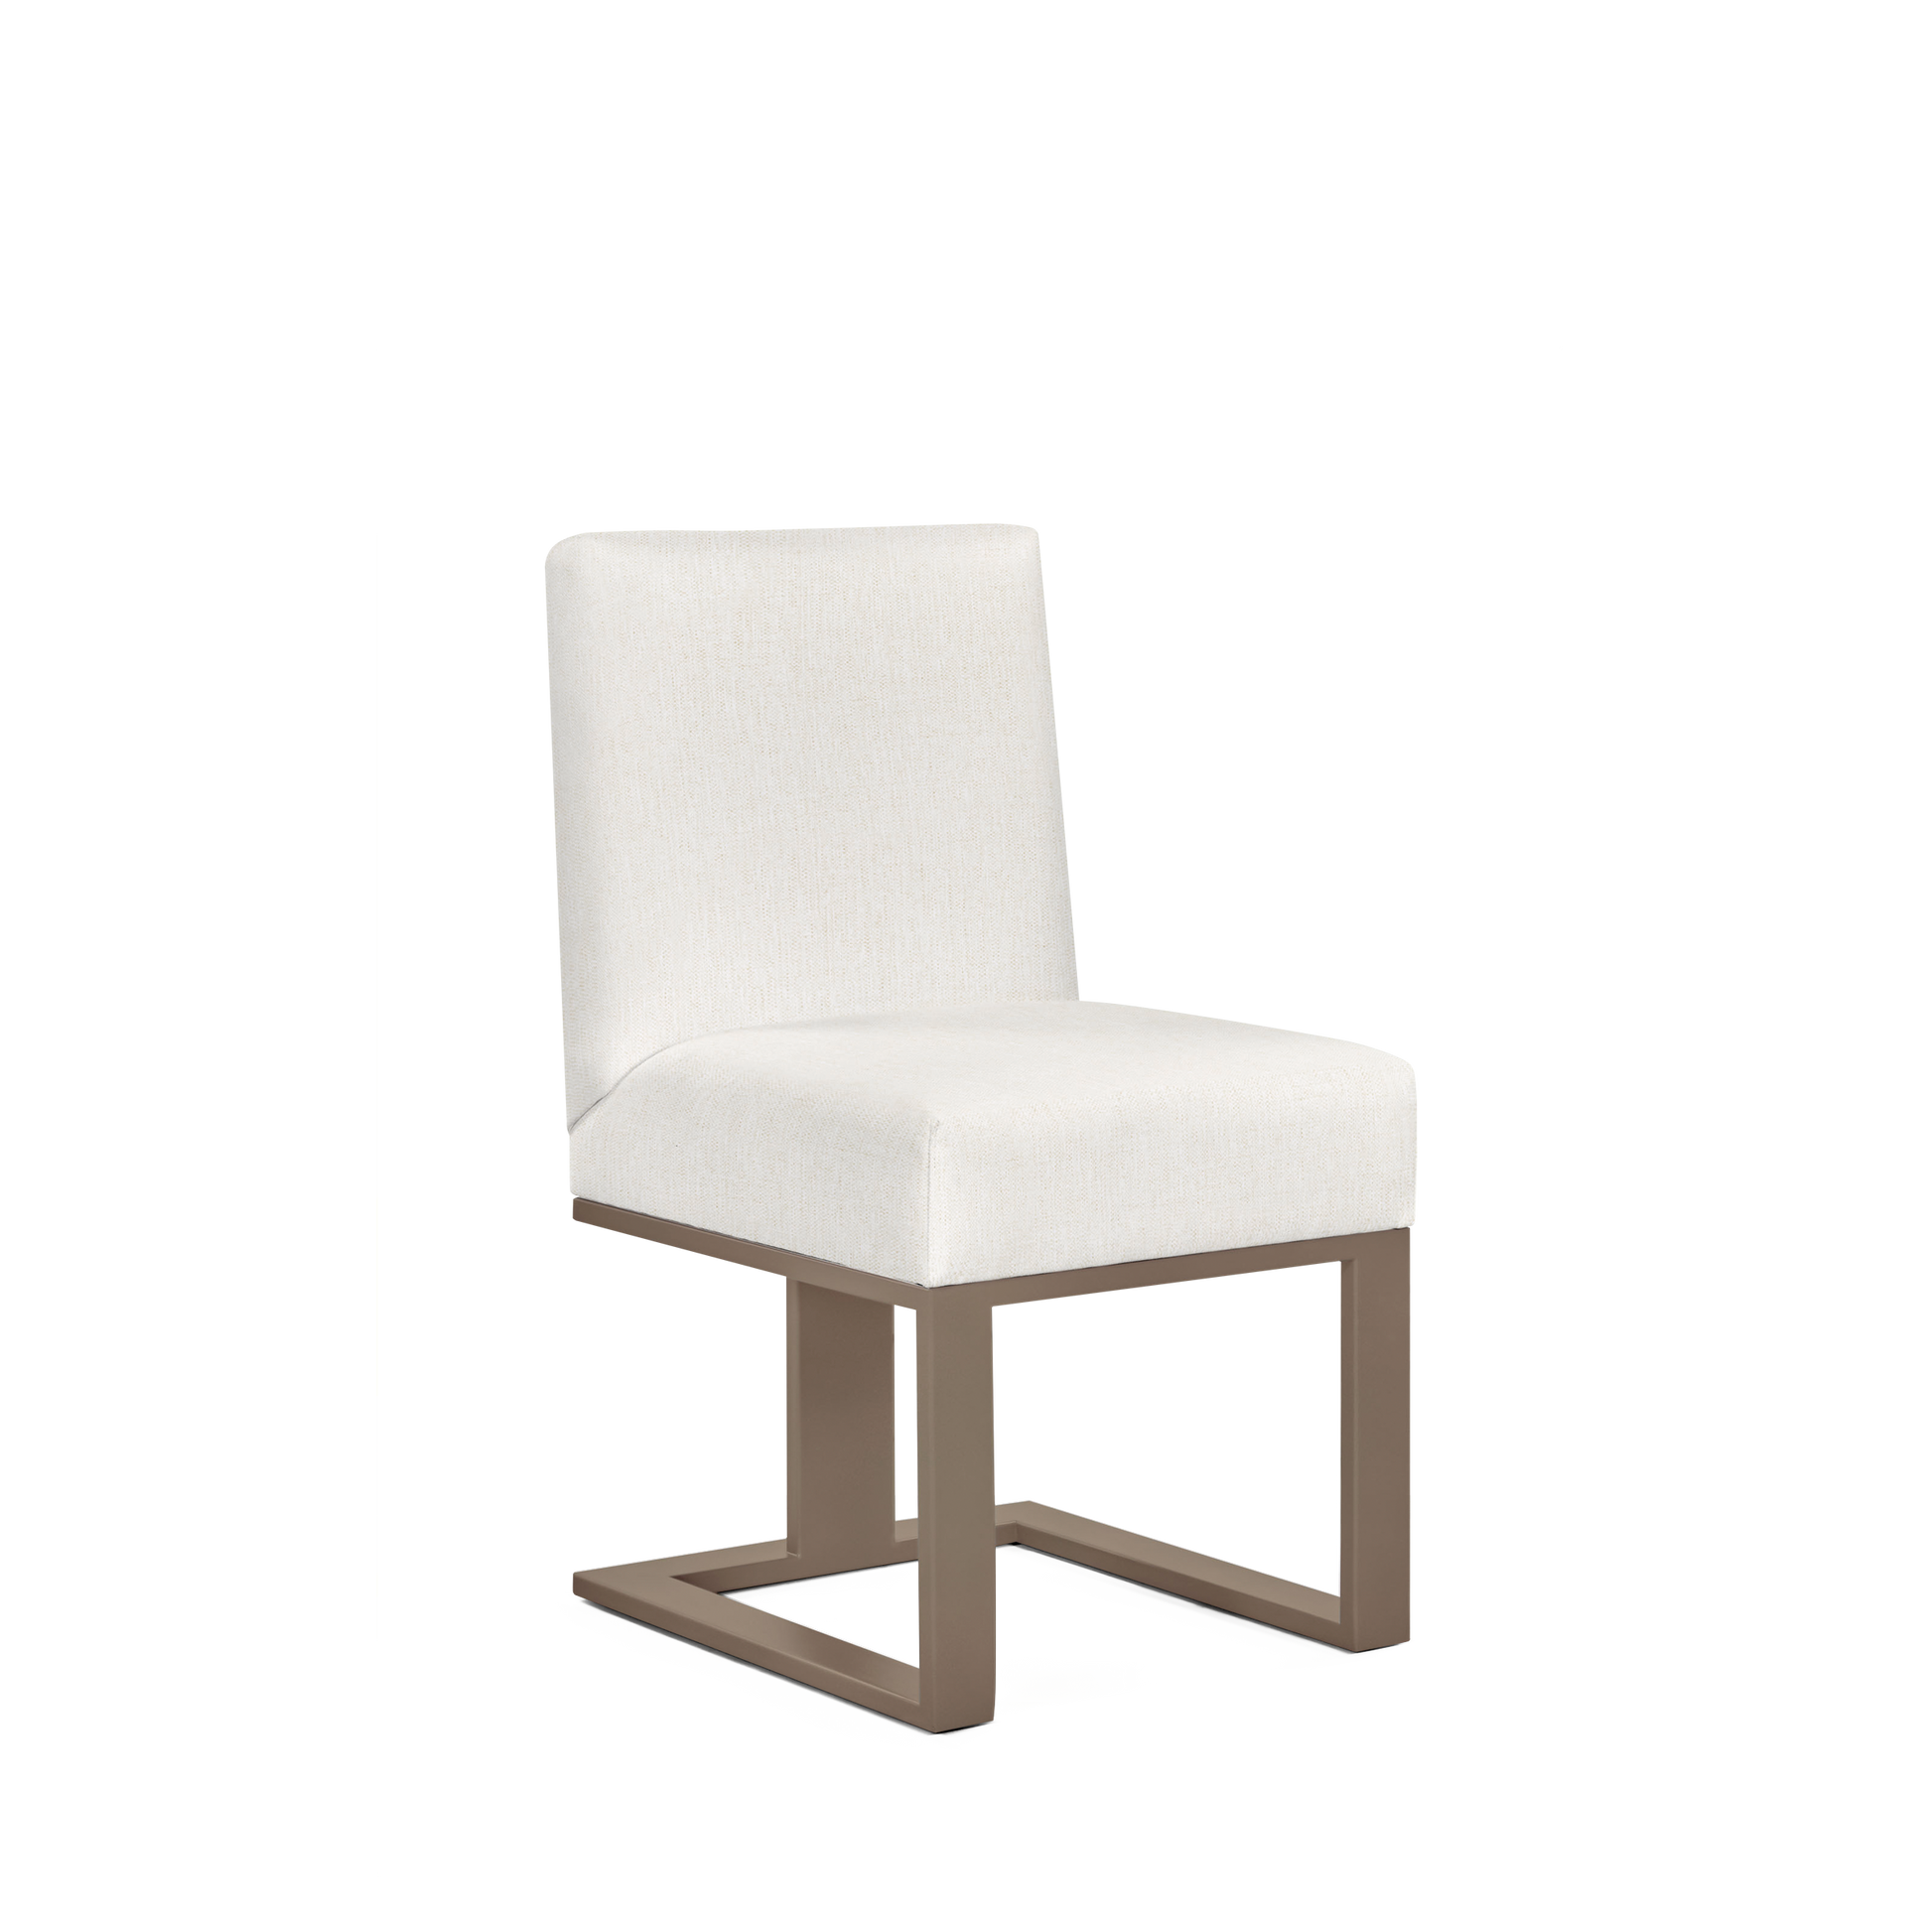 Len chair with bolt white and champagne wood legs 